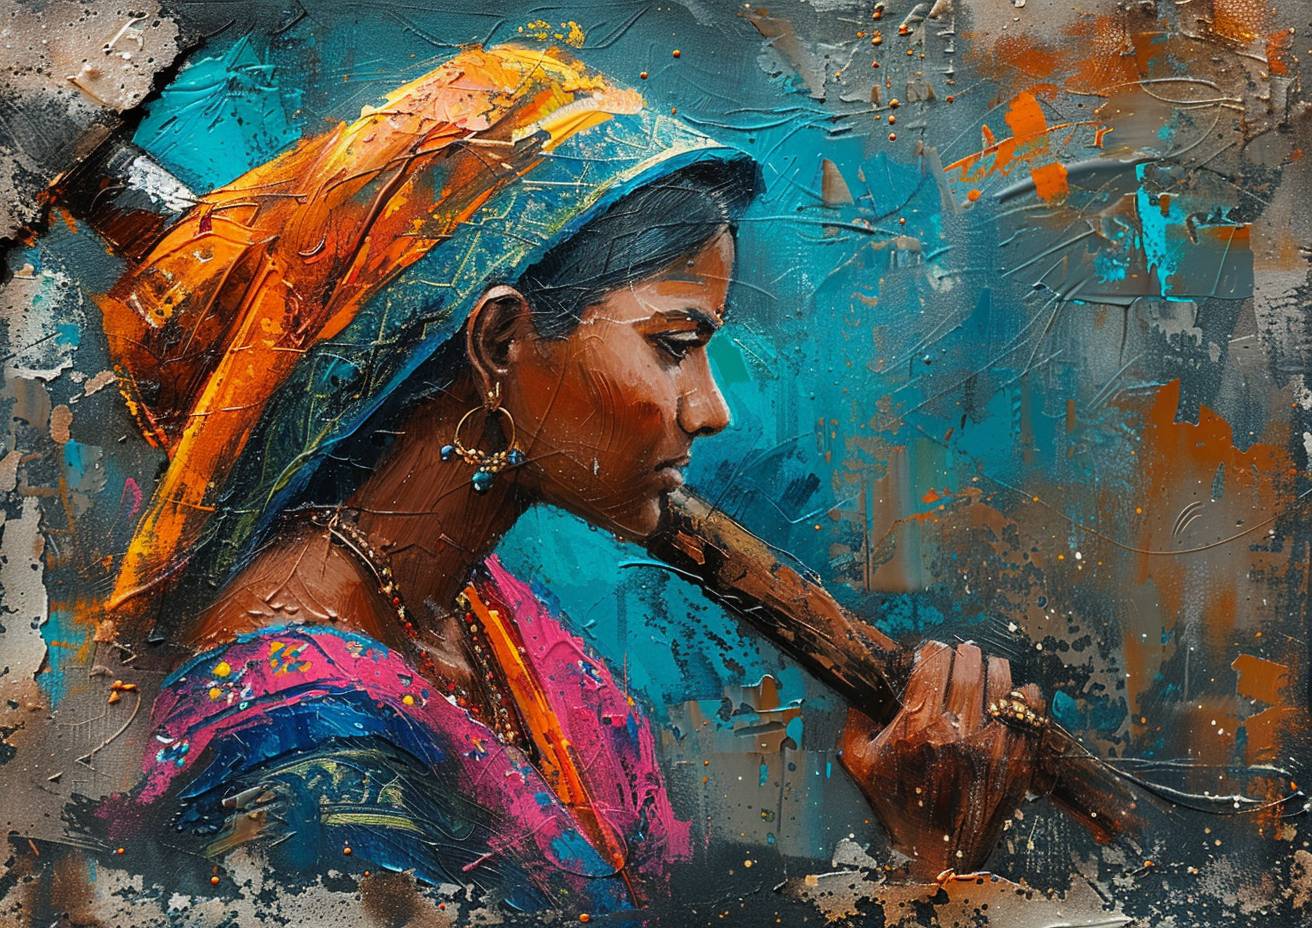 Dry brush painting on distressed canvas, Indian woman labourer, side profile, colourful sari, wielding a hammer, strong visual flow.